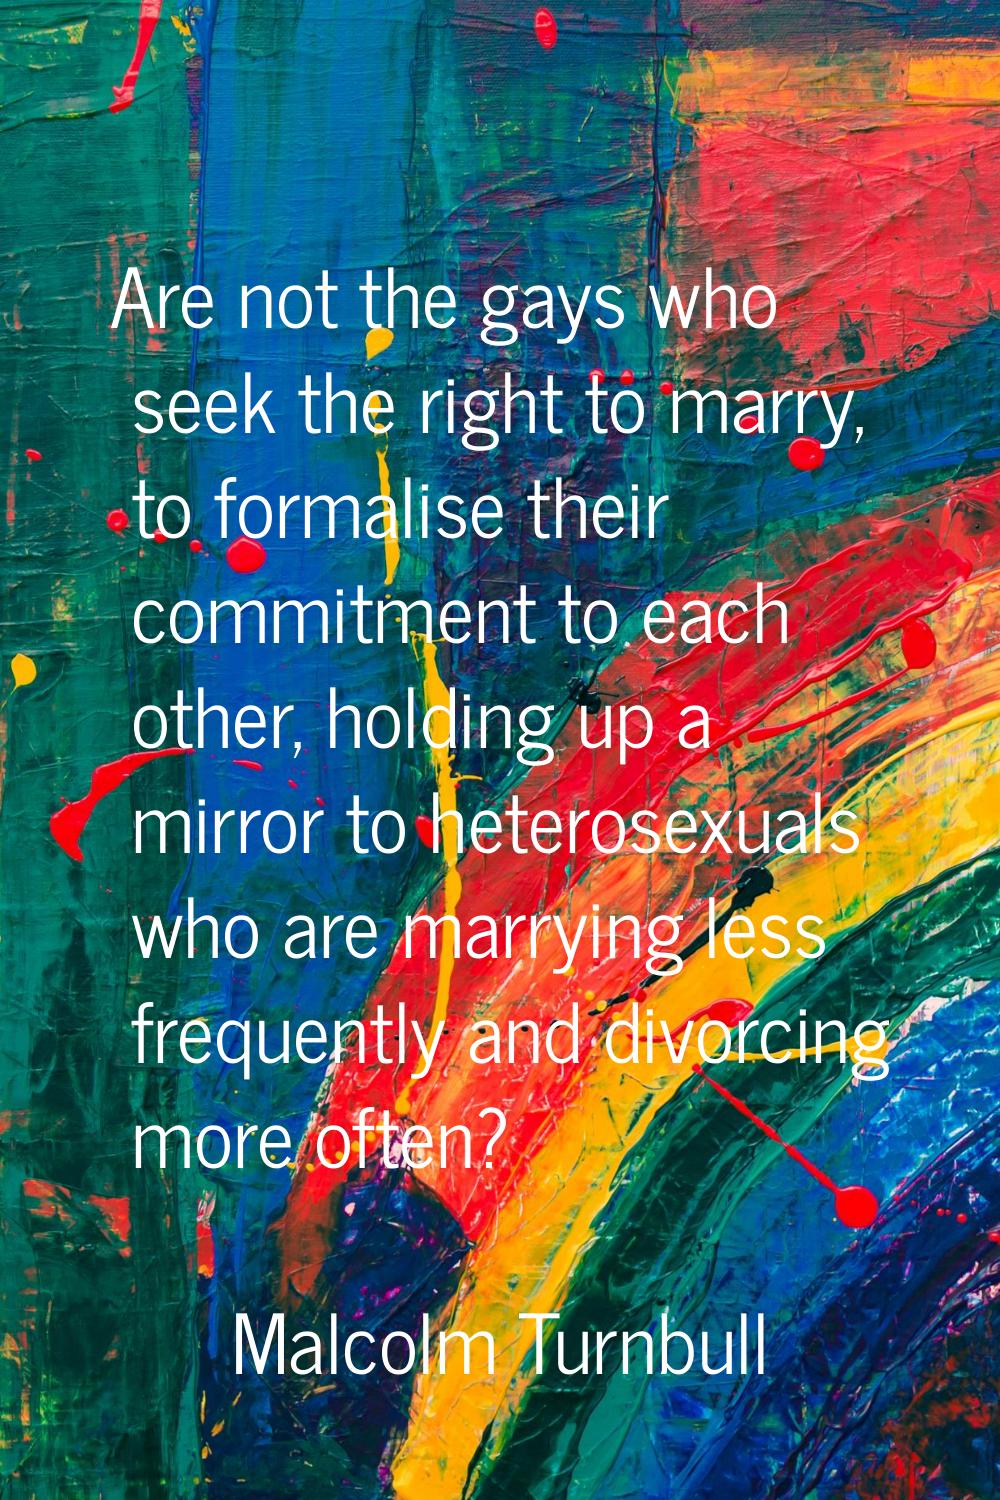 Are not the gays who seek the right to marry, to formalise their commitment to each other, holding 